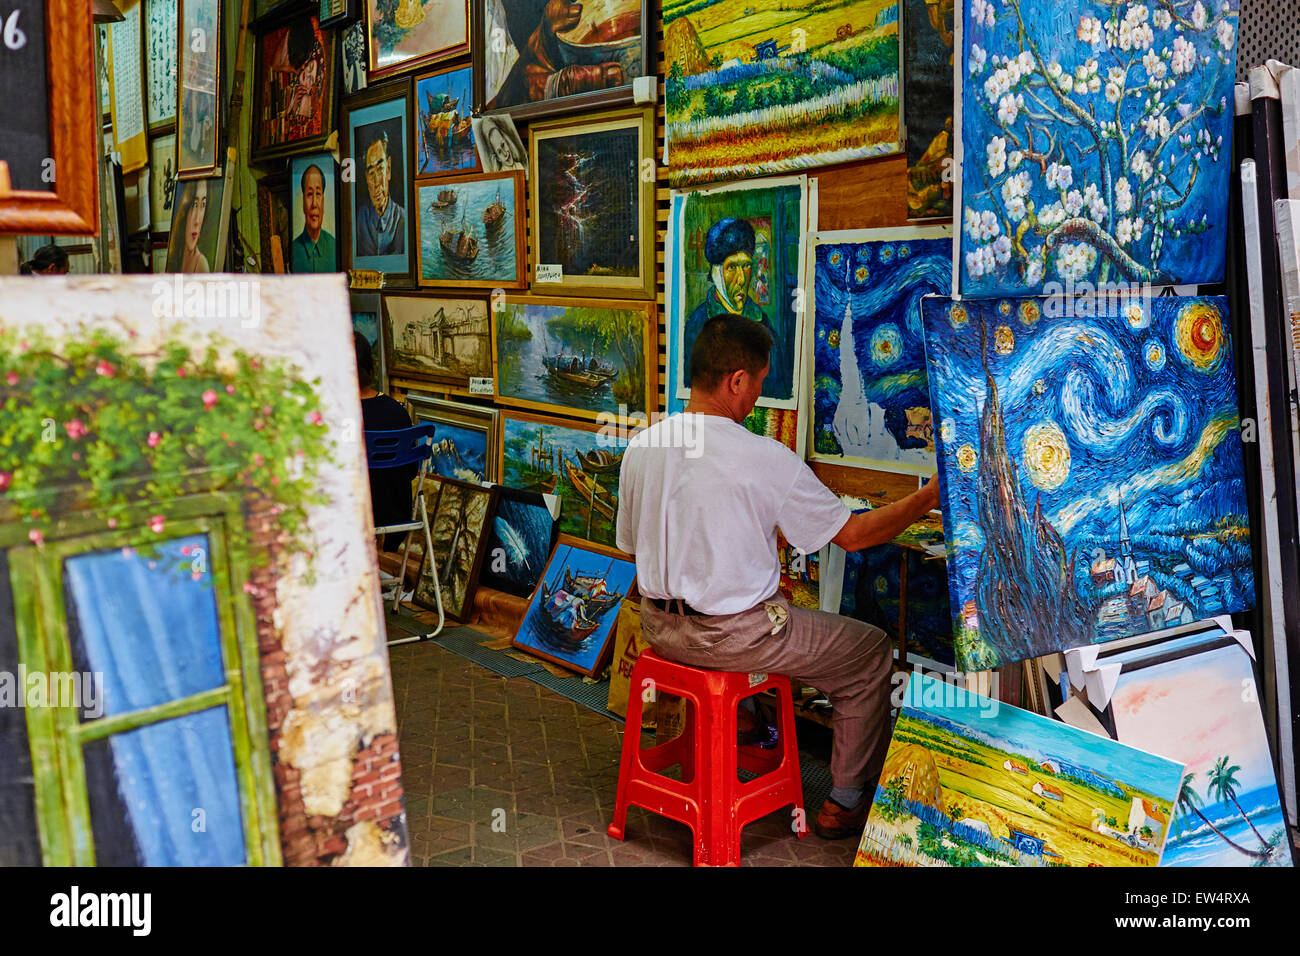 China, Guangdong province, Shenzhen, Dafen oil painting village, Dafen Village is one of the largest production centers for oil  Stock Photo